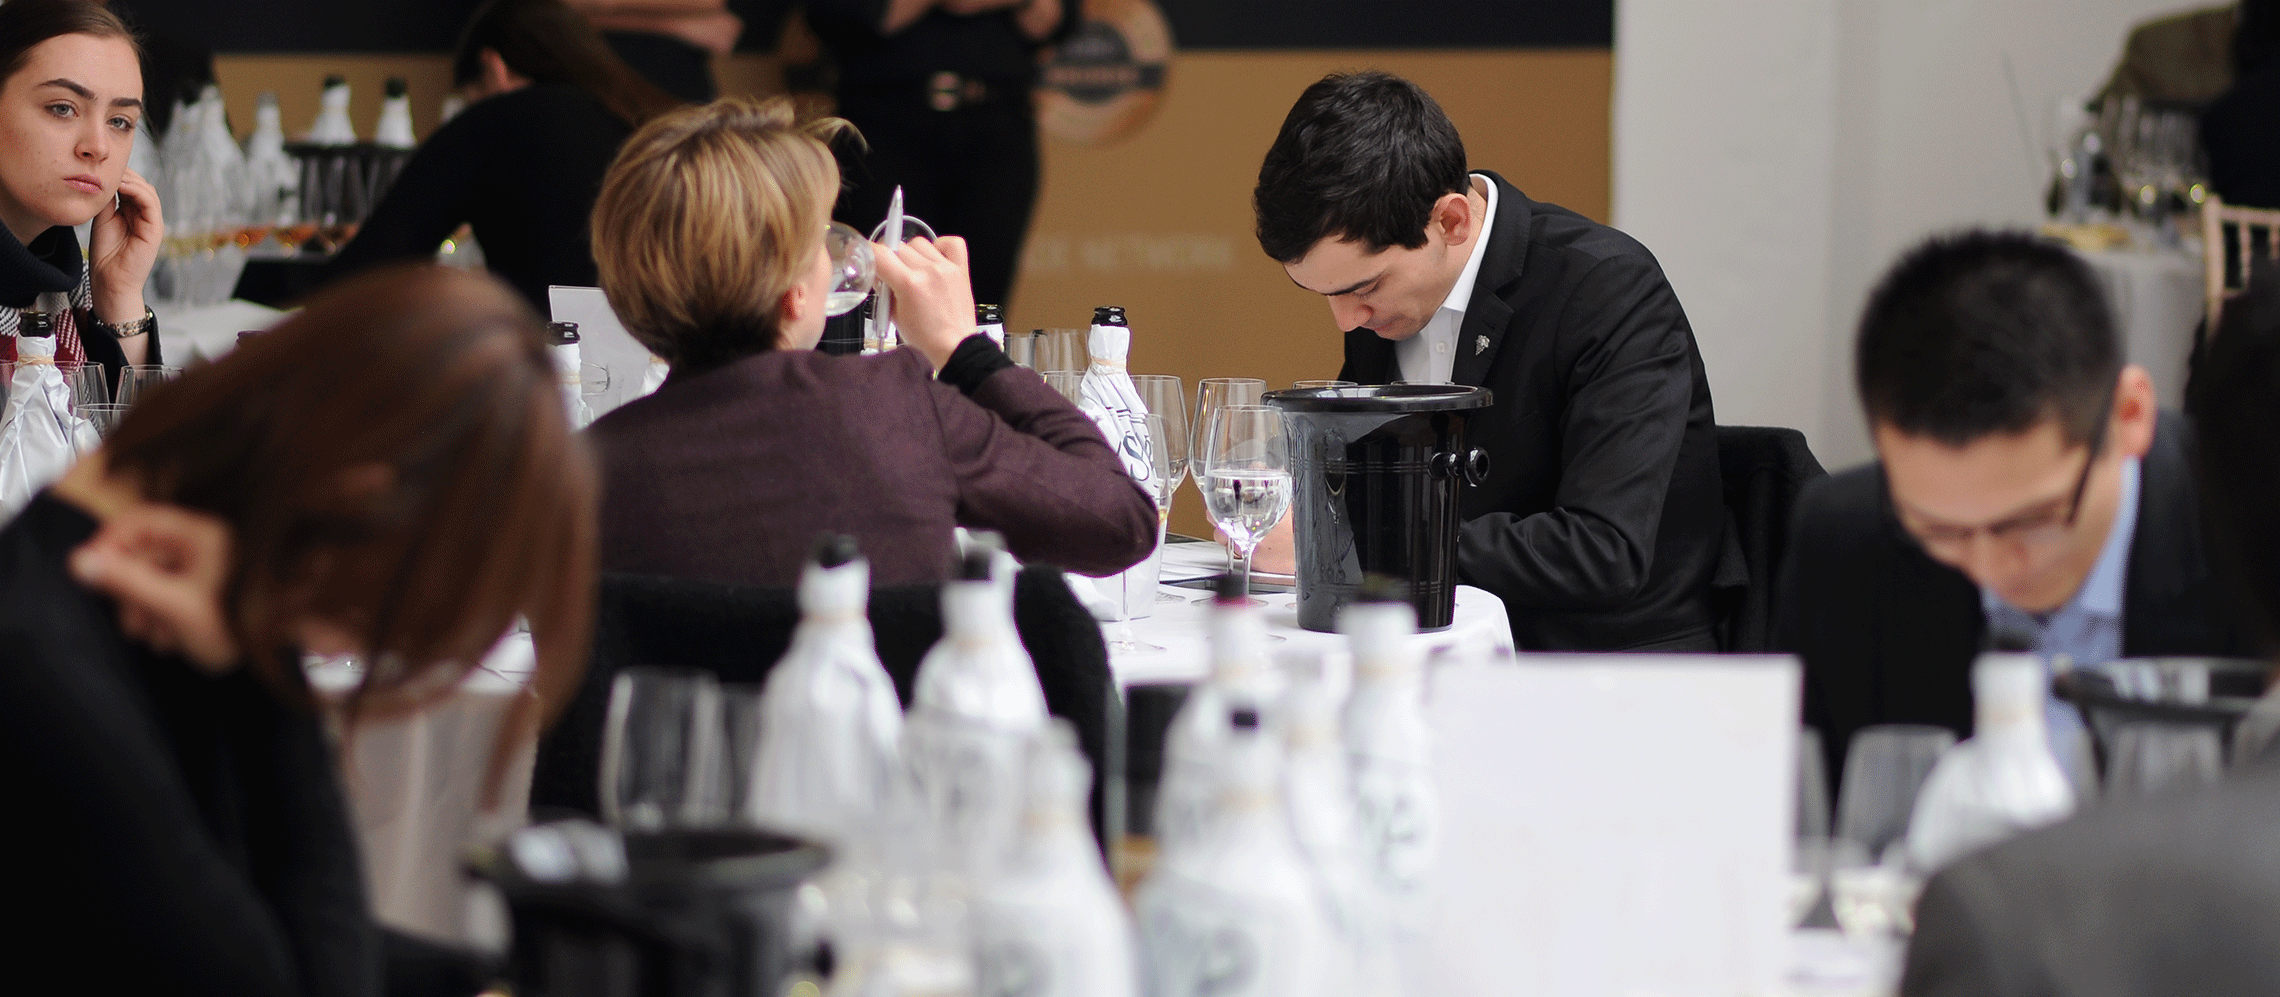 Photo for: Grow Your Wine Brand In With London Wine Competition